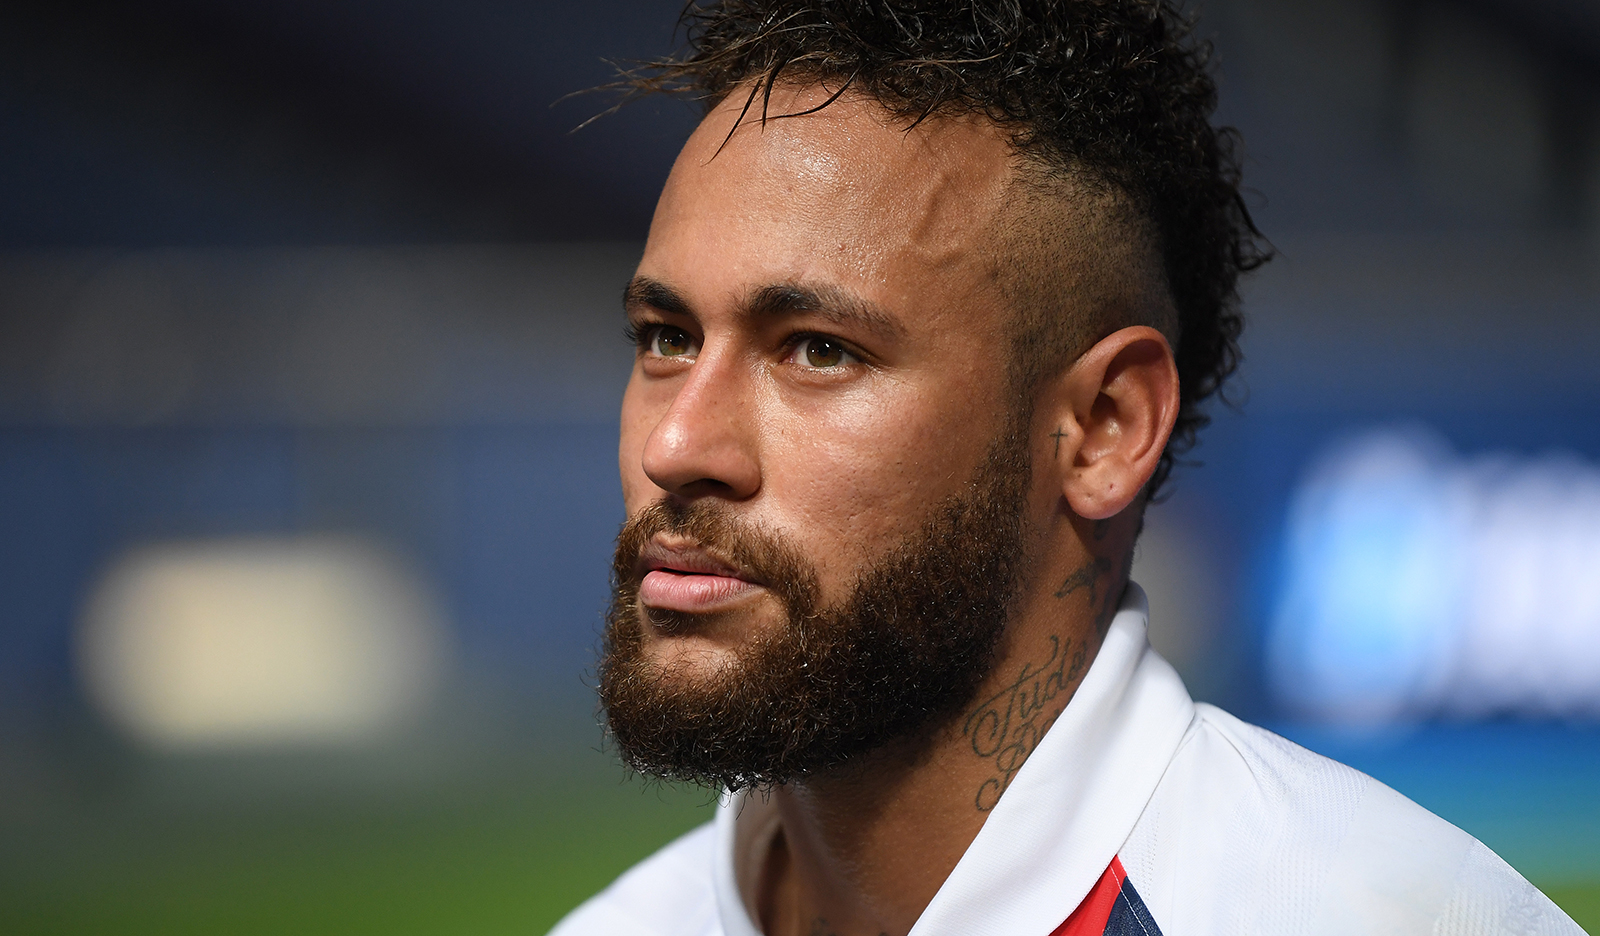 Neymar of Paris Saint-Germain is interviewed after the UEFA Champions League quarter final match between Atalanta and PSG at Estadio do Sport Lisboa e Benfica on August 12, in Lisbon, Portugal.